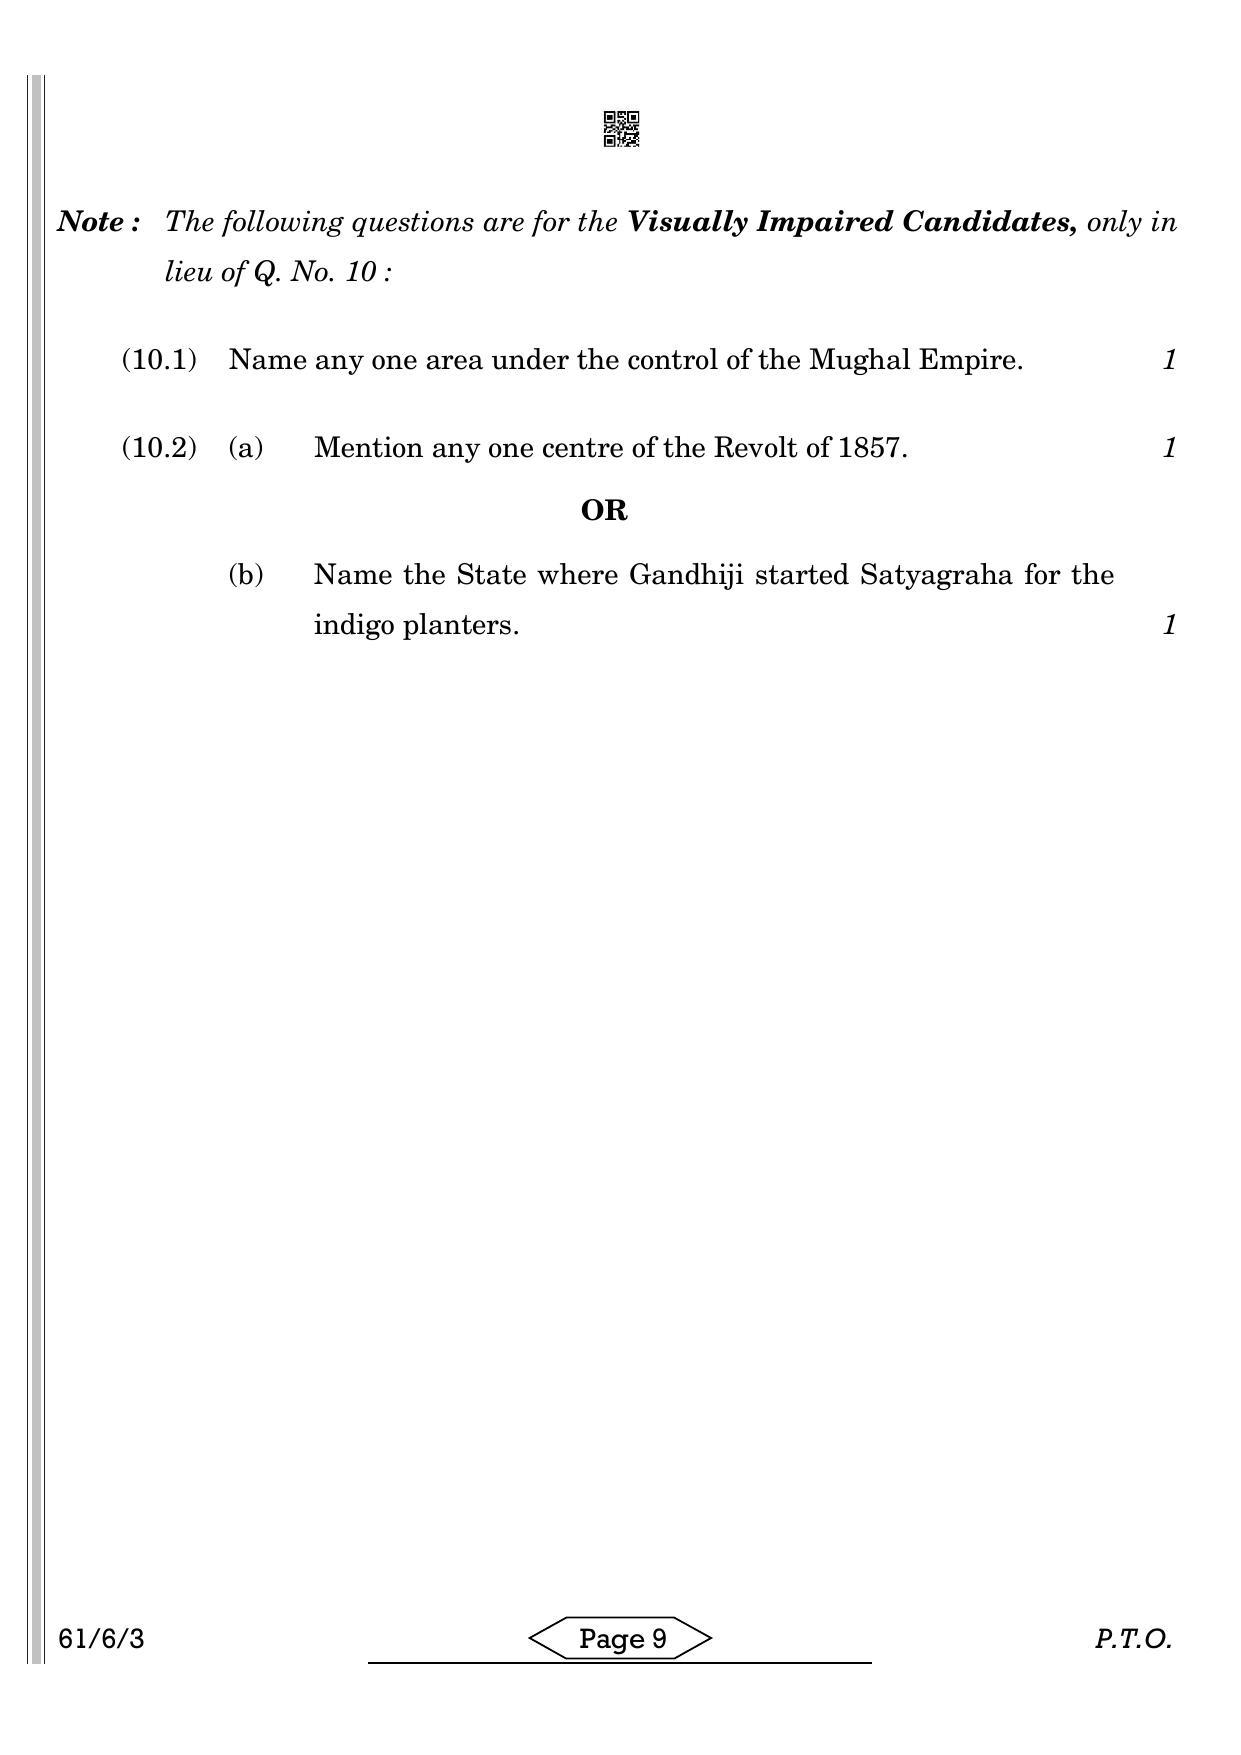 CBSE Class 12 61-6-3 HISTORY 2022 Compartment Question Paper - Page 9